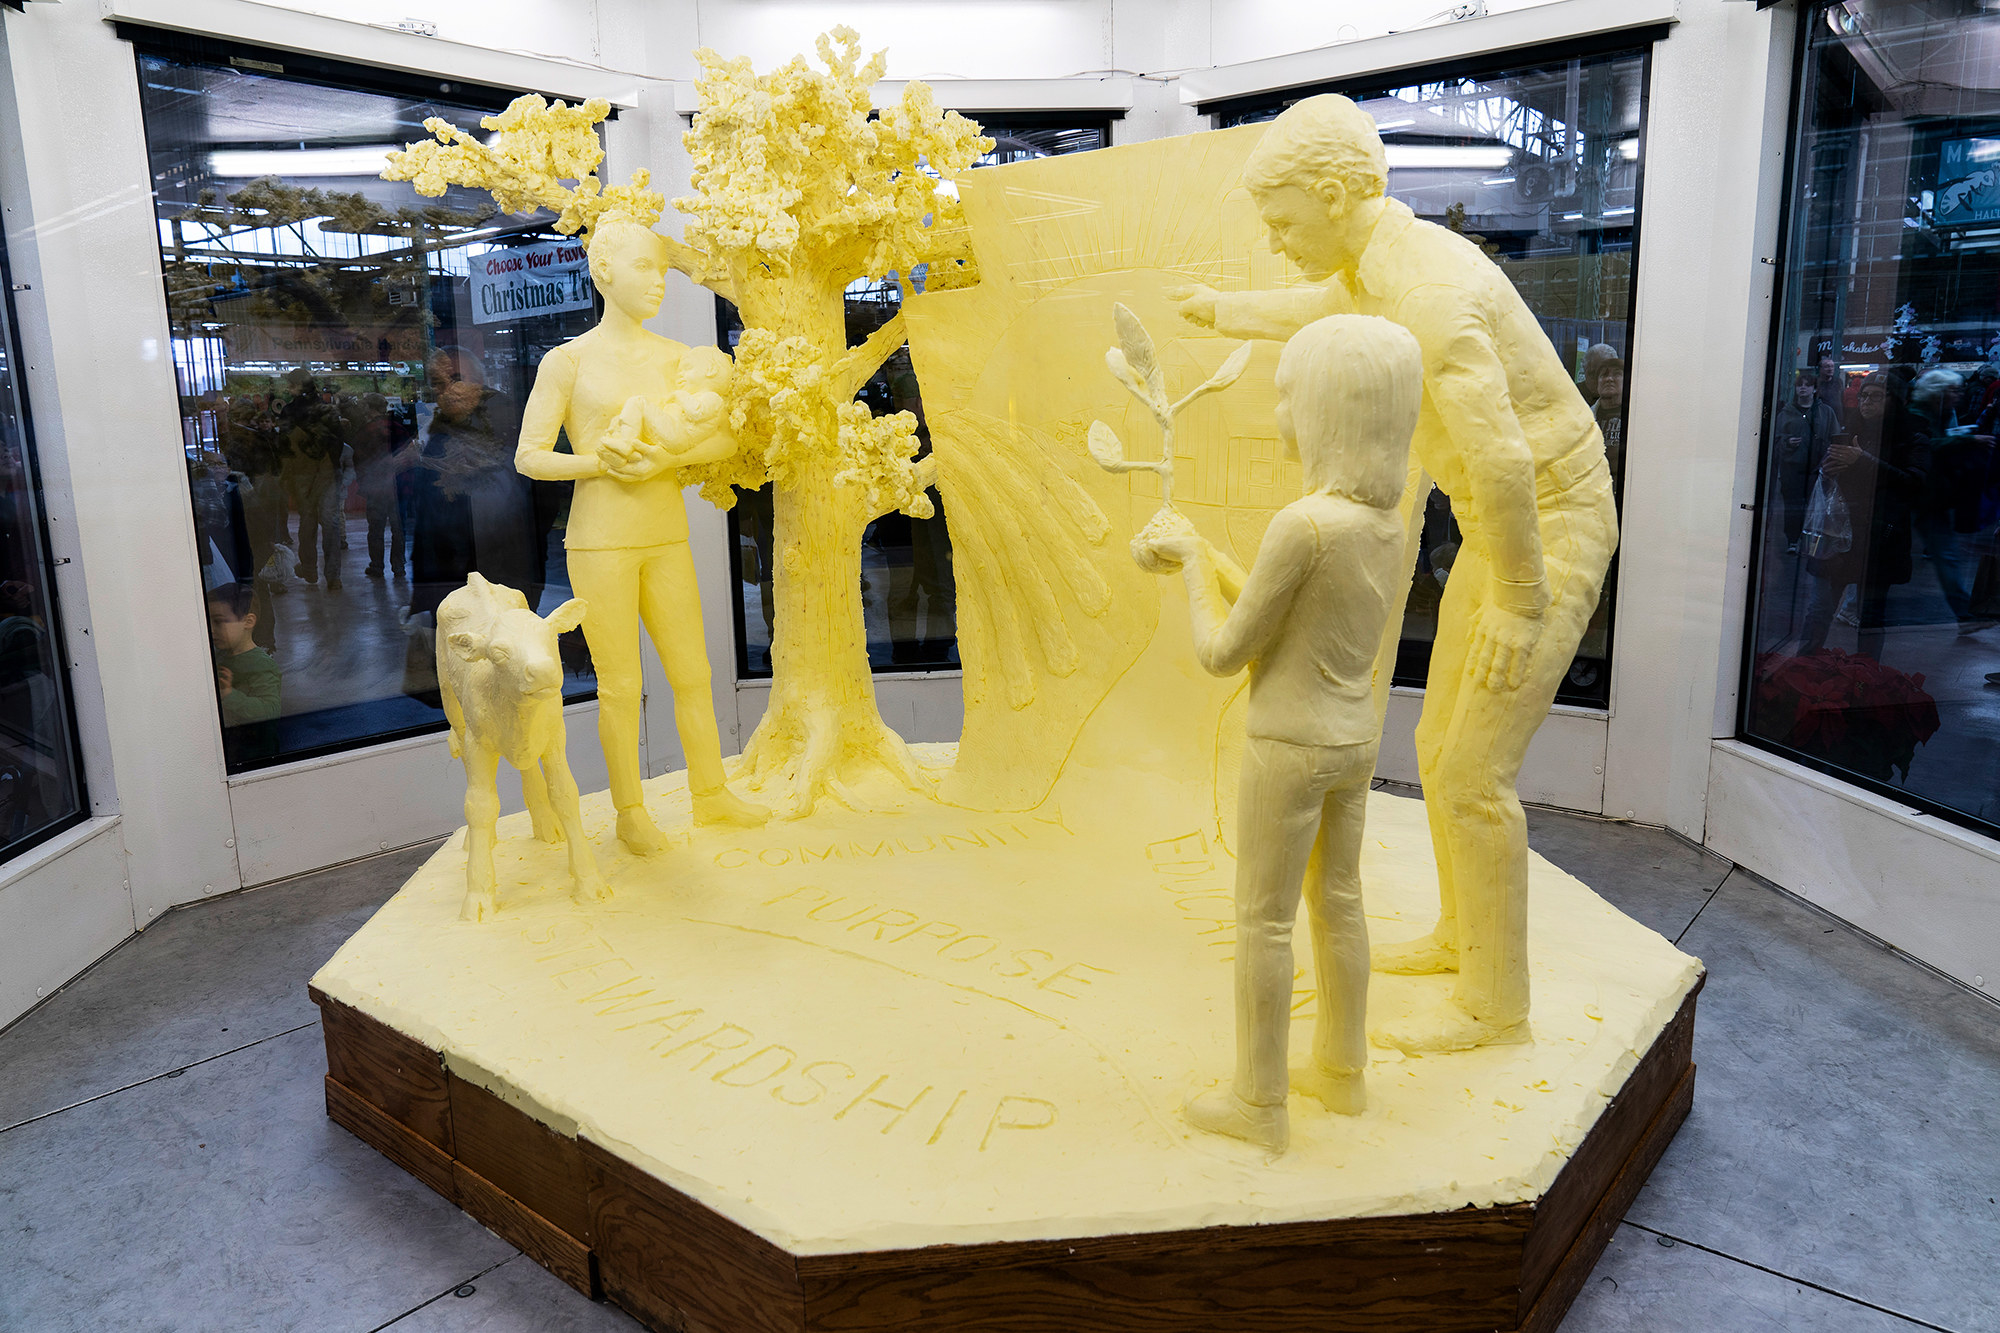 A life-size scene of people standing next to a tree and a goat composed entirely of butter